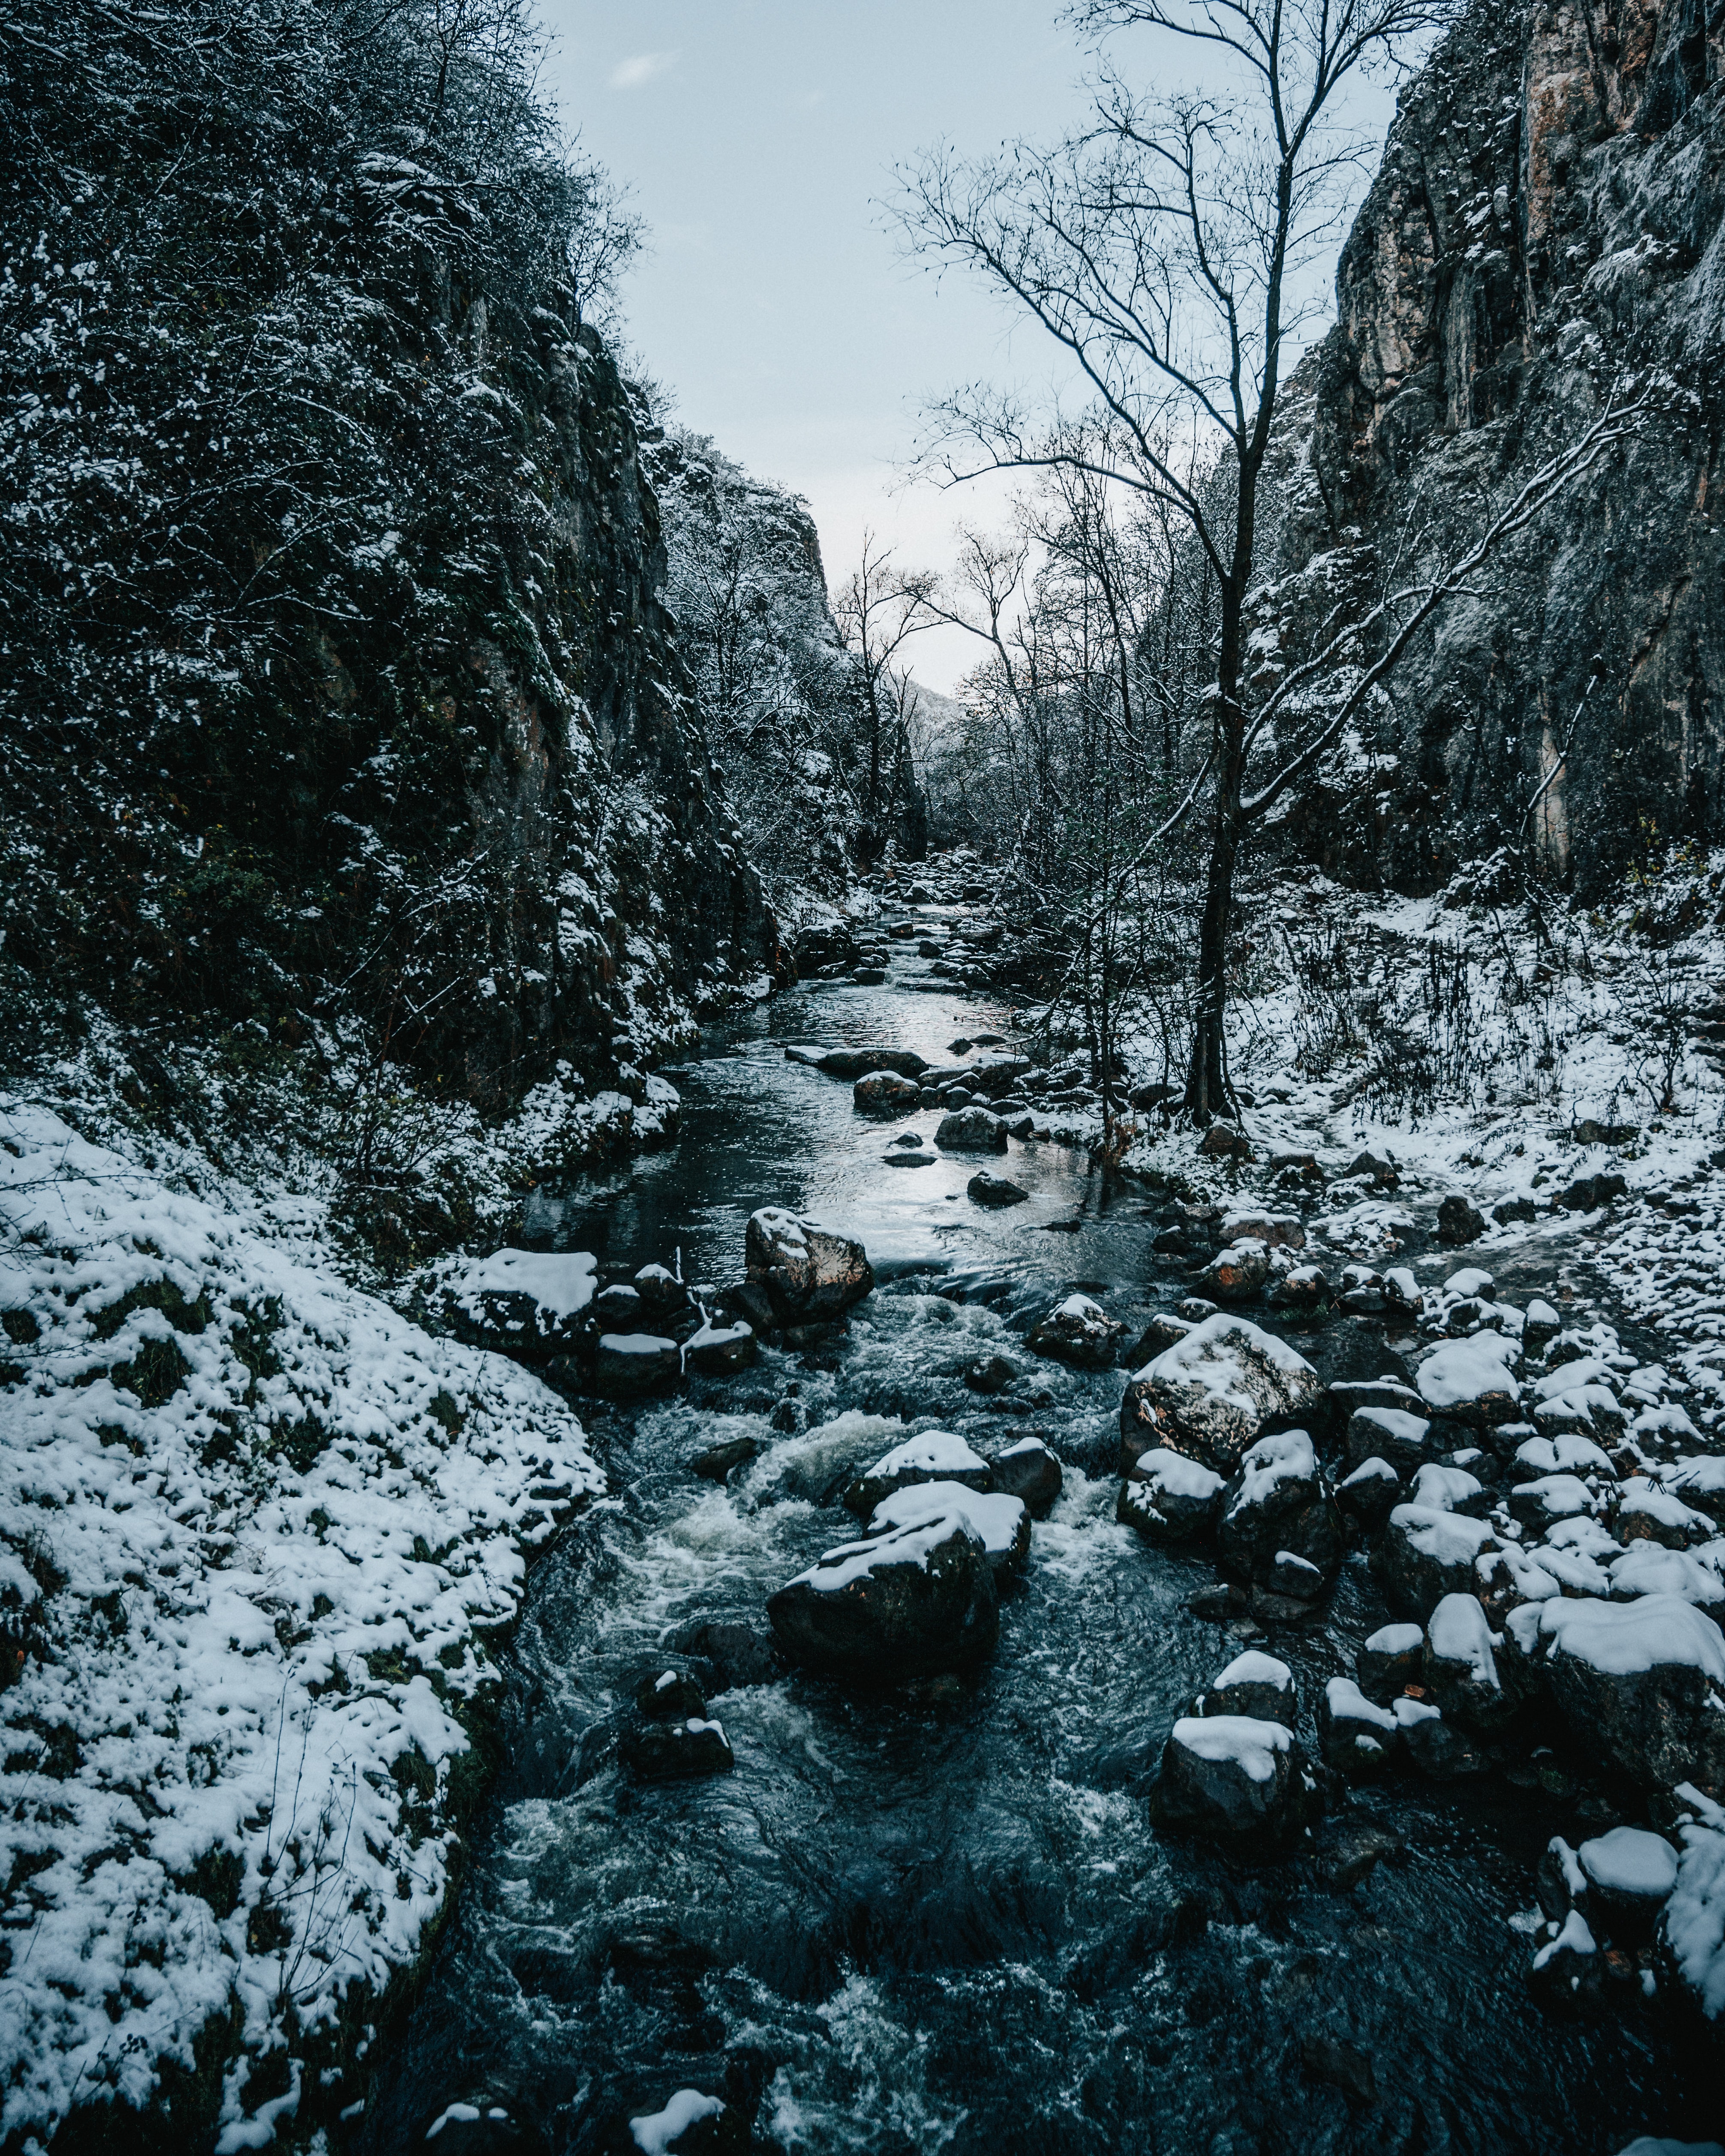 android snow, winter, nature, rivers, stones, rocks